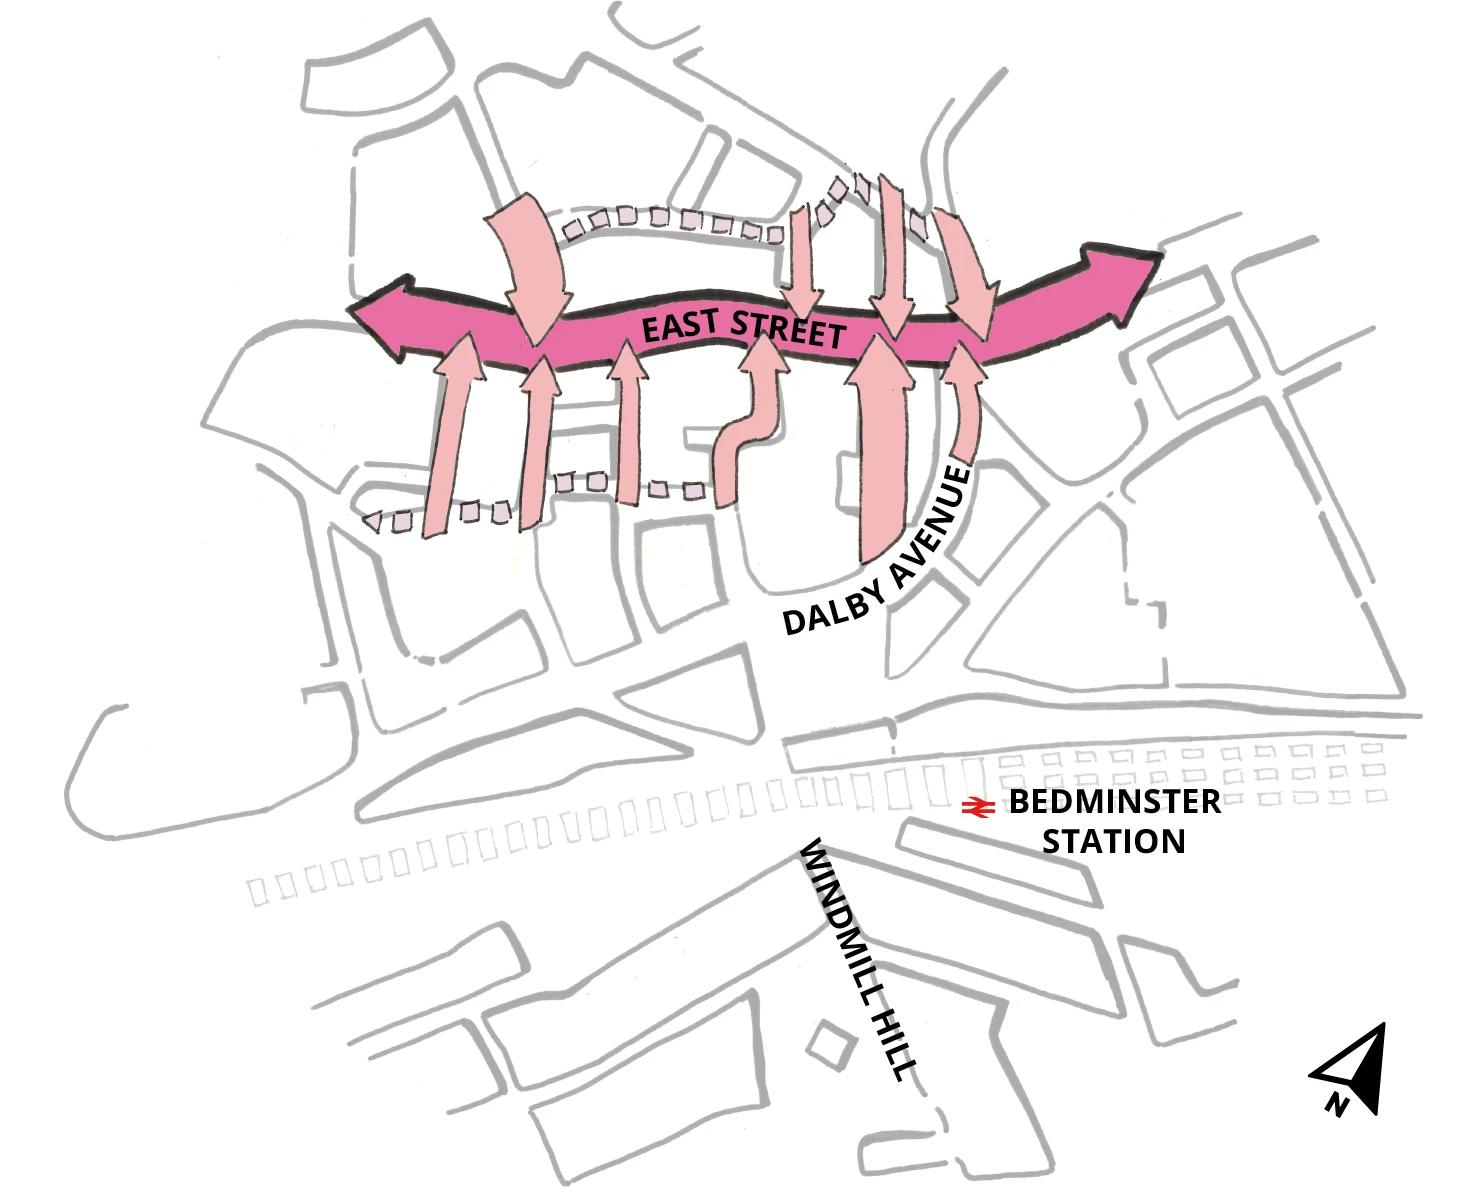 The base of this diagram, which is the same for all the framework diagrams, is a hand drawing showing the urban blocks of the wider Bedminster Green area – East Street is towards the top of the image, Dalby Avenue is in the middle, the railway and Bedminster station is below that and Windmill Hill is at the bottom. A large pink arrow is running along East Street and has several smaller pink arrows pointing towards it running along the adjoining streets. There are two dashed lines running parallel to East Street above and below on the smaller residential streets nearby.